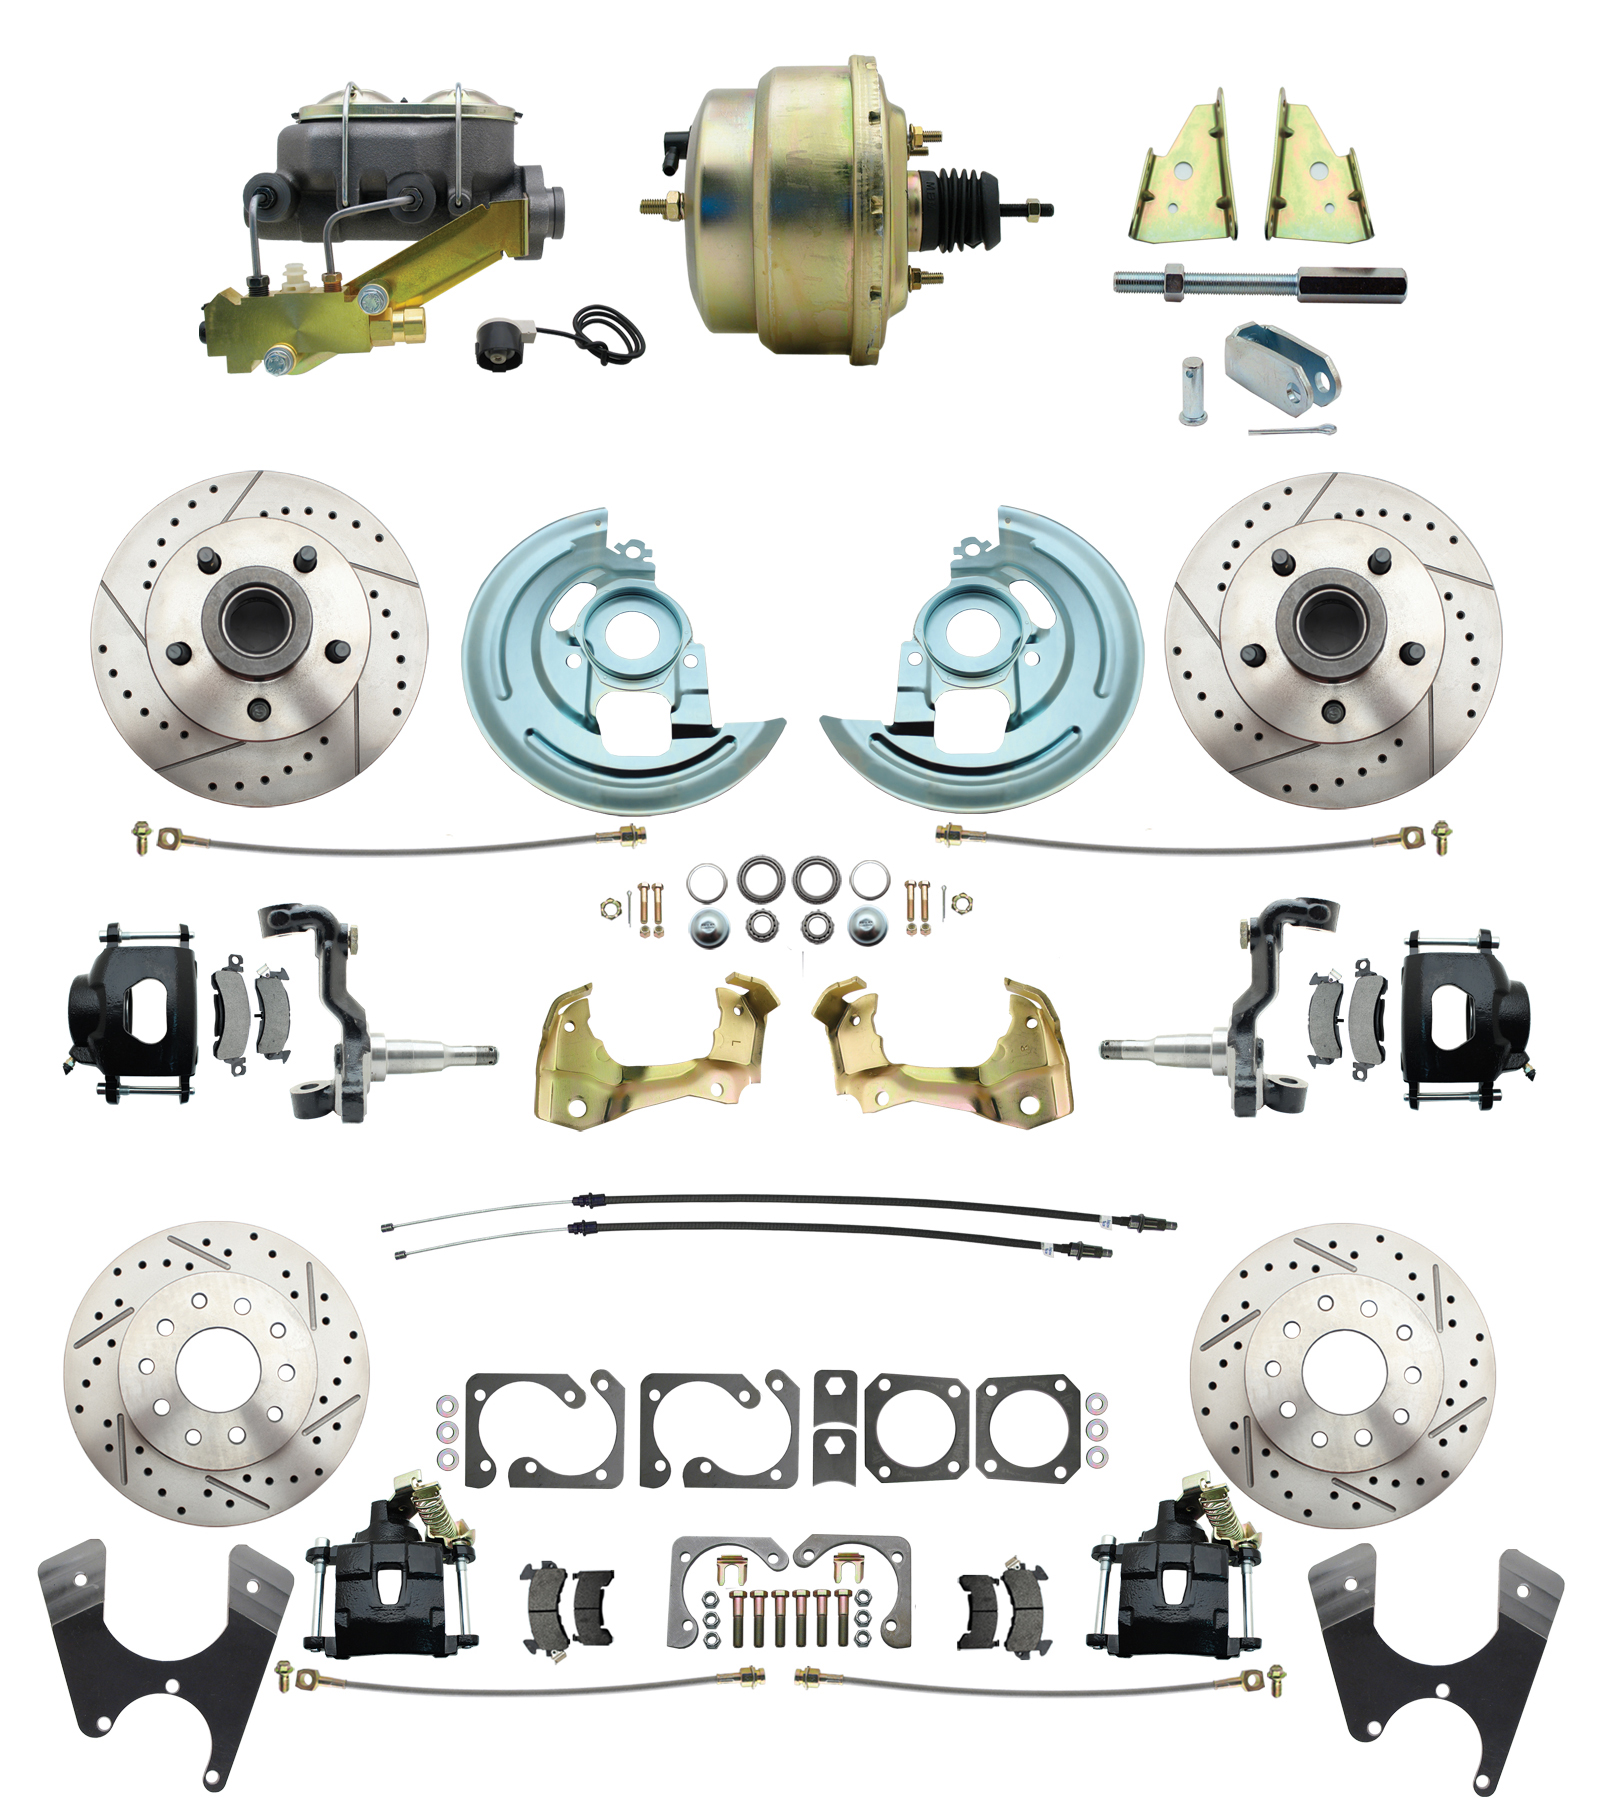 1967-1969 Camaro/ Firebird & 1968-1974 Chevy Nova Front & Rear Power Disc Brake Conversion Kit Drilled & Slotted & Powder Coated Black Calipers Rotors W/ 8Dual Zinc Booster Kit